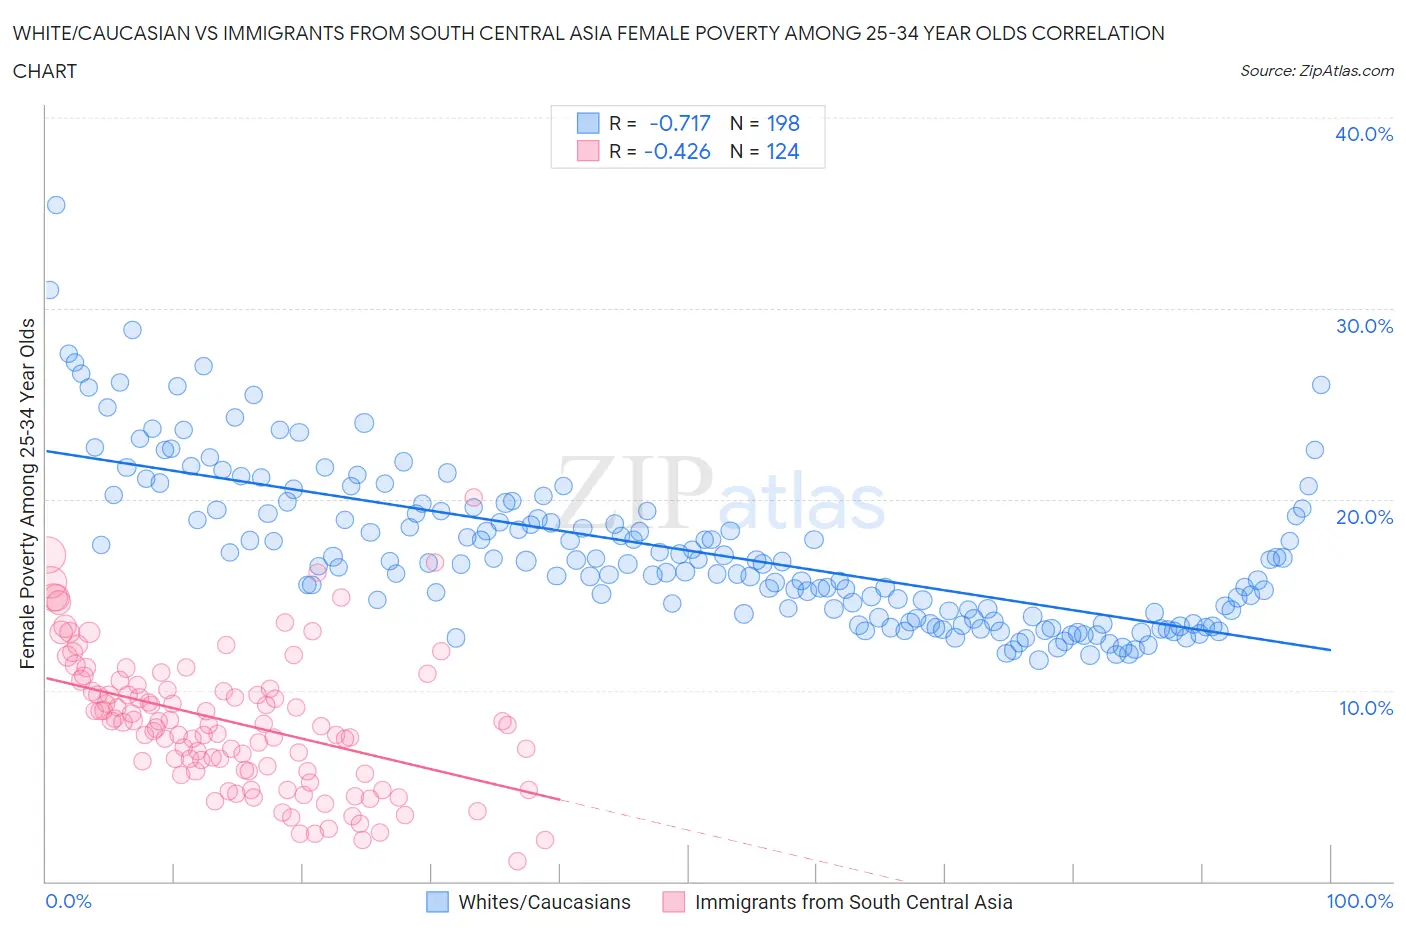 White/Caucasian vs Immigrants from South Central Asia Female Poverty Among 25-34 Year Olds